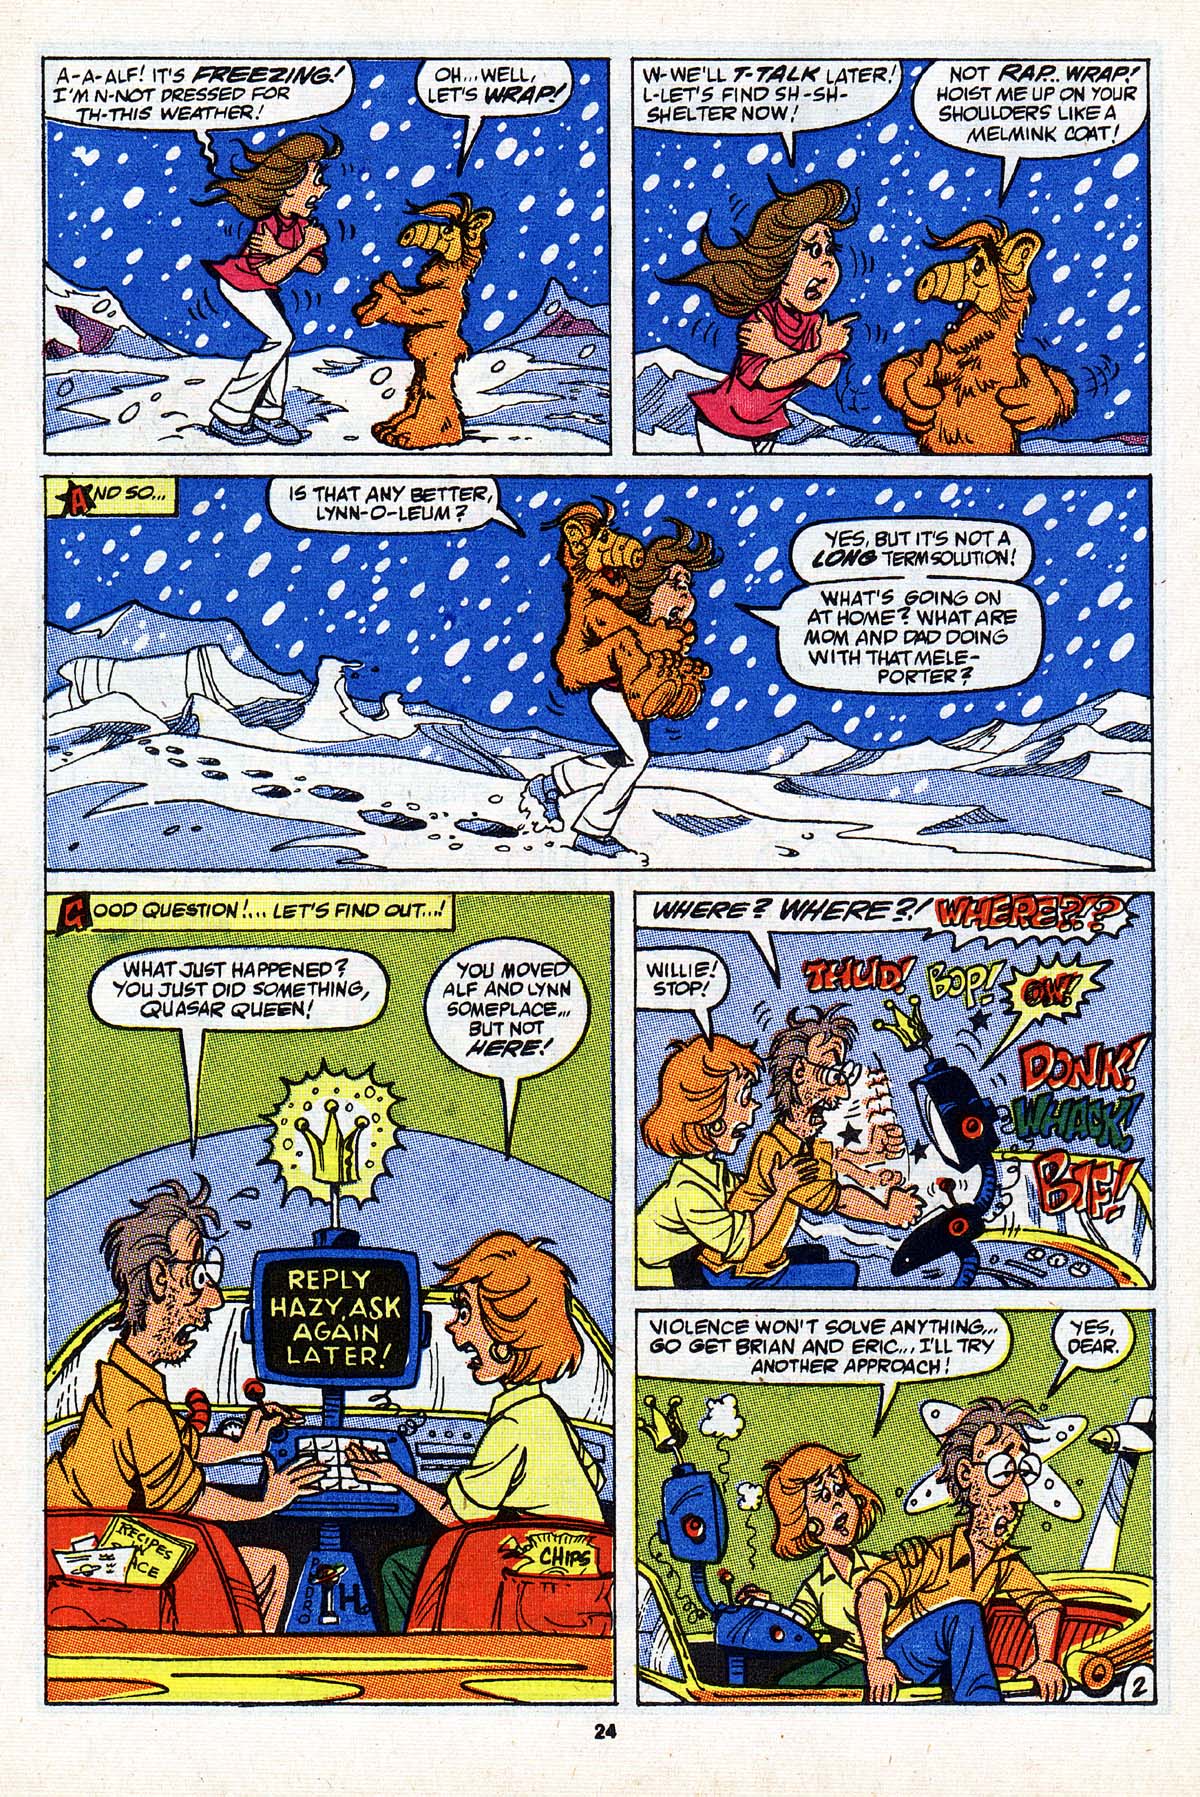 Read online ALF comic -  Issue #23 - 19